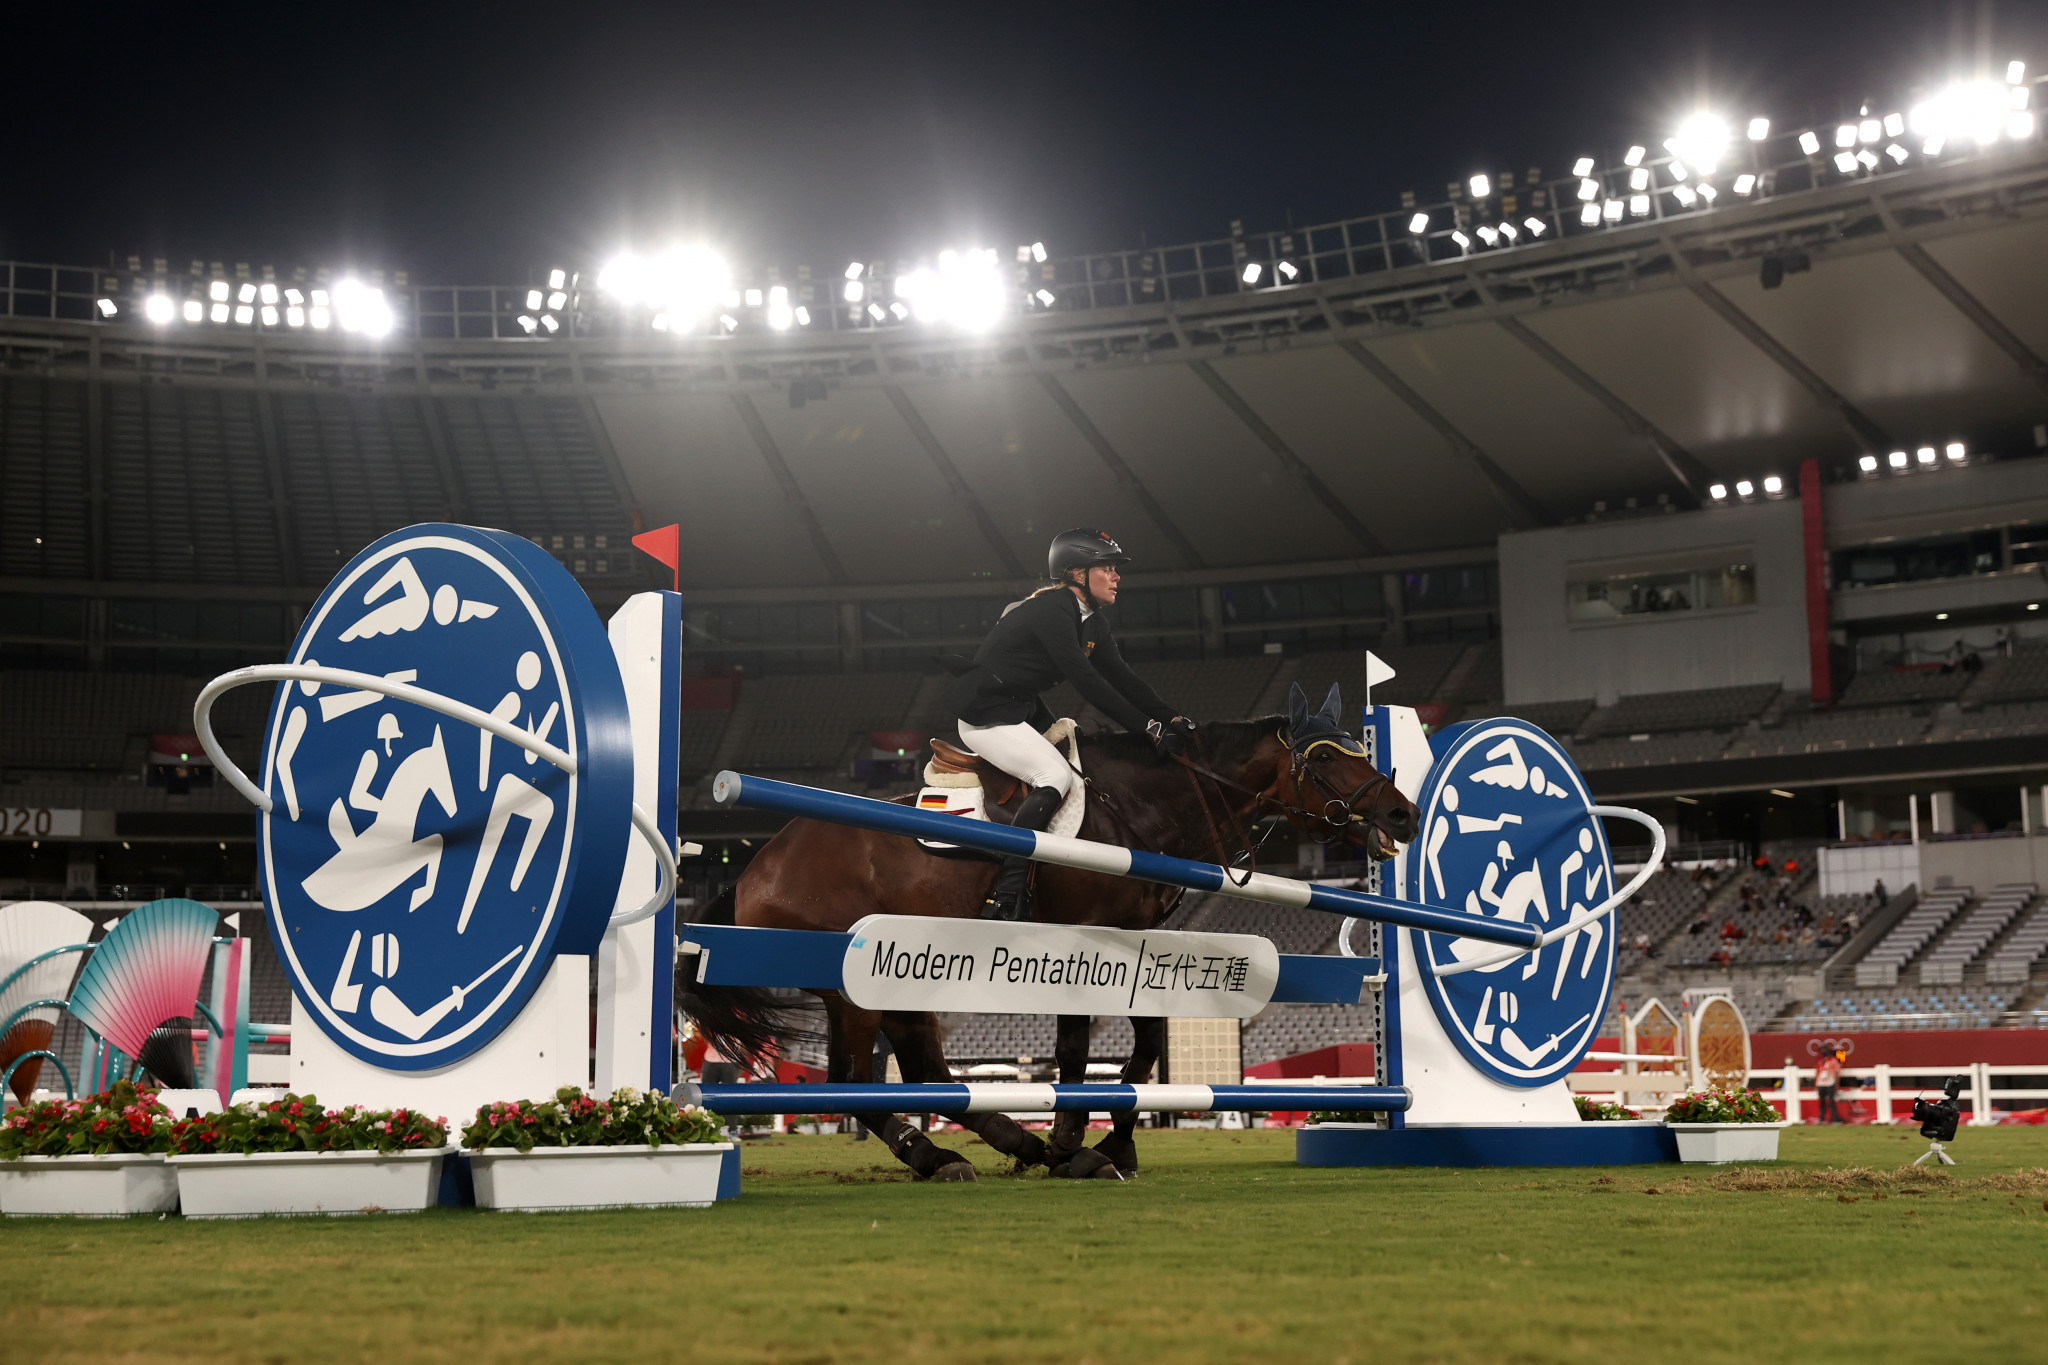 The horse Saint-Boy was one of several who refused to jump in the riding discipline at Tokyo 2020 ©Getty Images